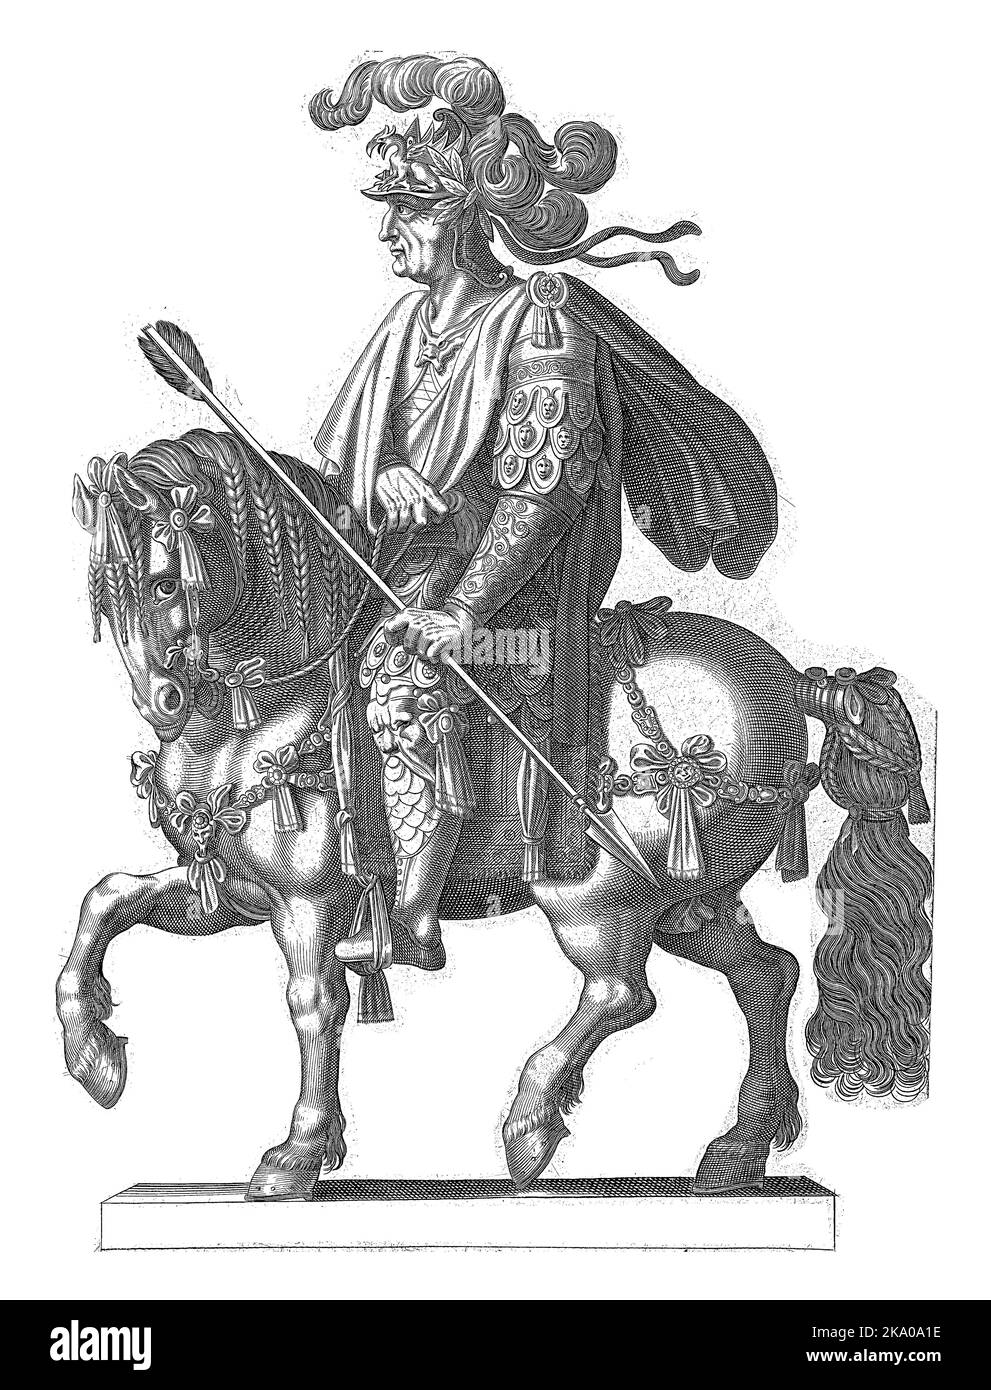 Emperor Galba on horseback, in profile depicted with one hand on the bridle and a spear in the other. Stock Photo